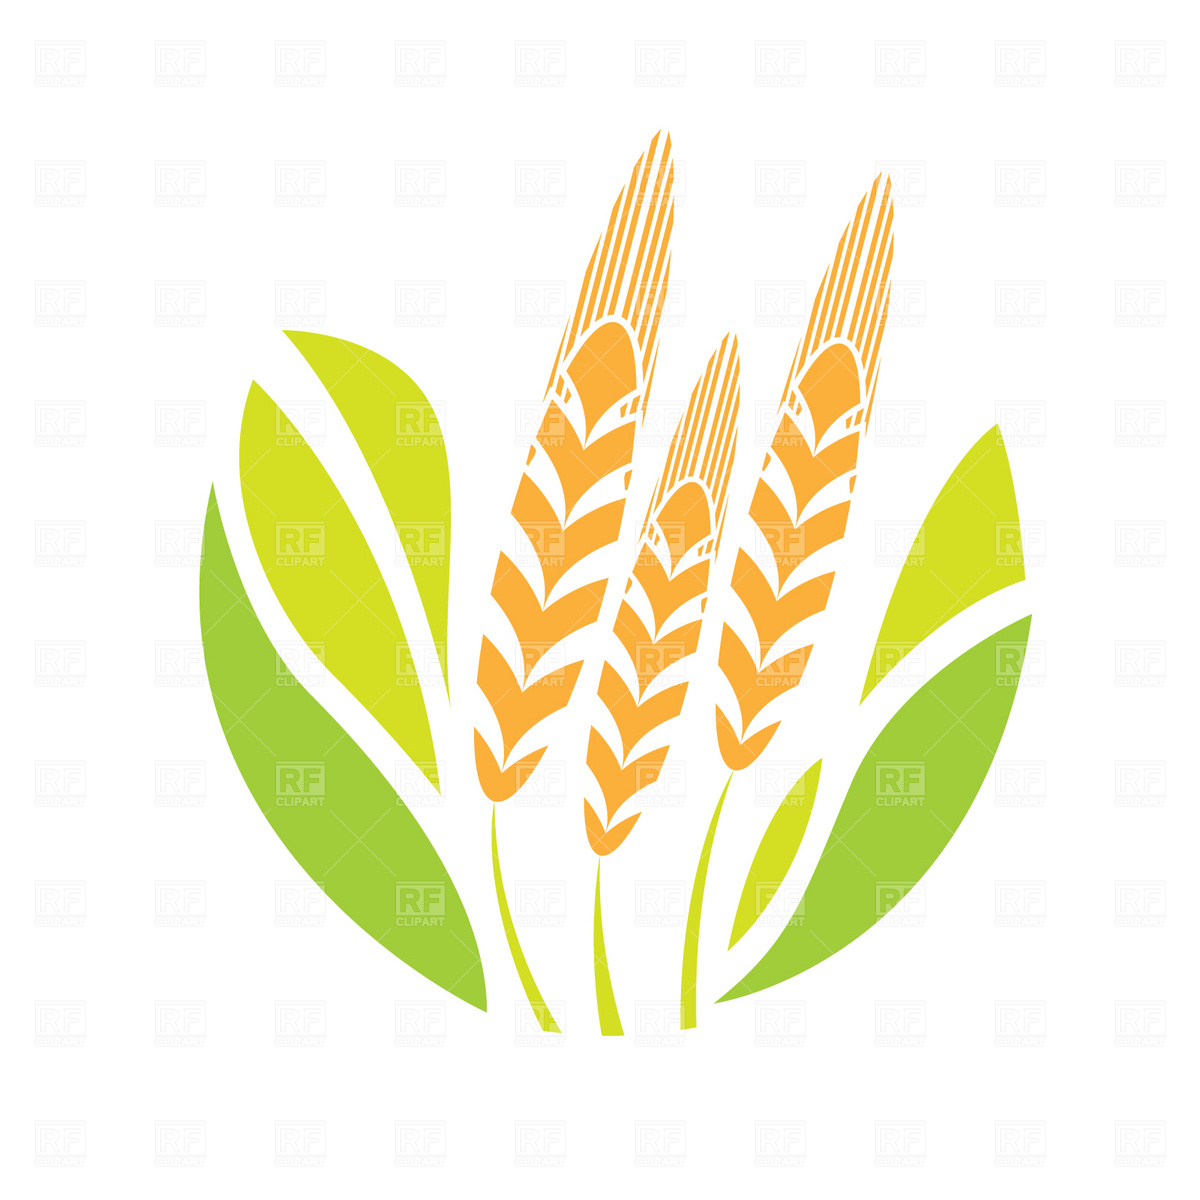 Agriculture Emblem Download Royalty Free Vector Clipart  Eps